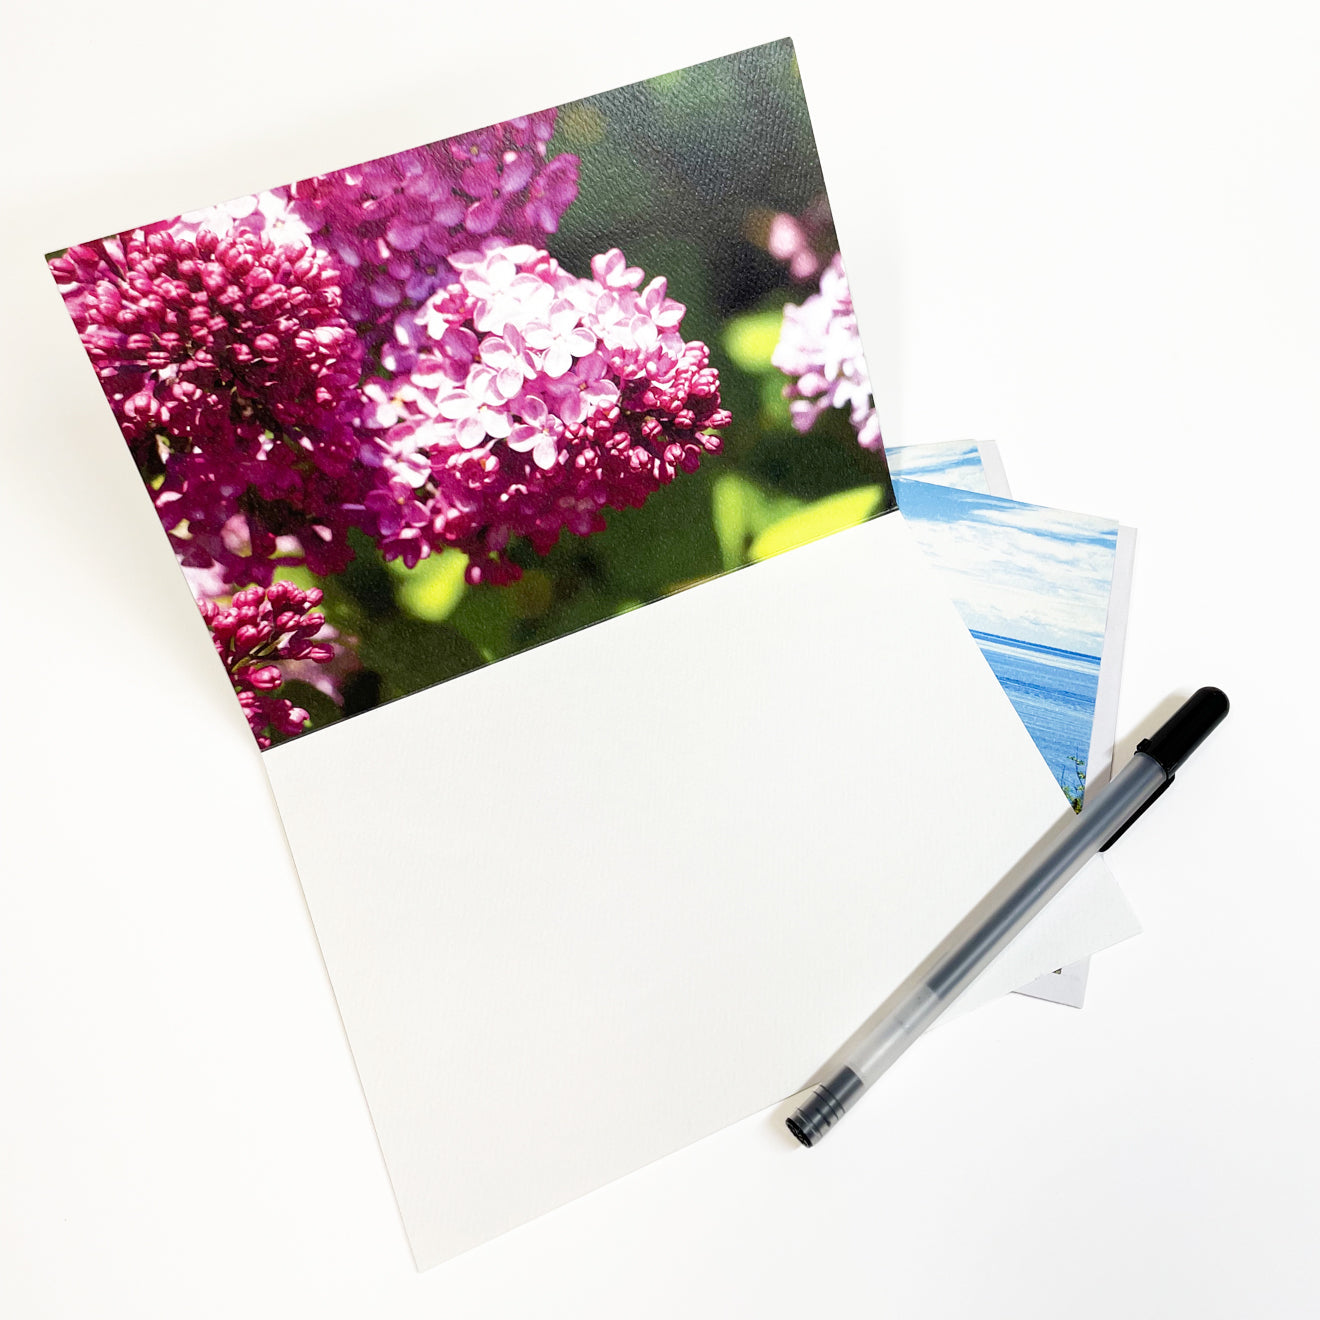 Blank greeting card featuring a photograph of lilacs blooming on Mackinac Island's West Bluff with a view of Round Island Lighthouse by local artist Jennifer Wohletz of Mackinac Memories. 